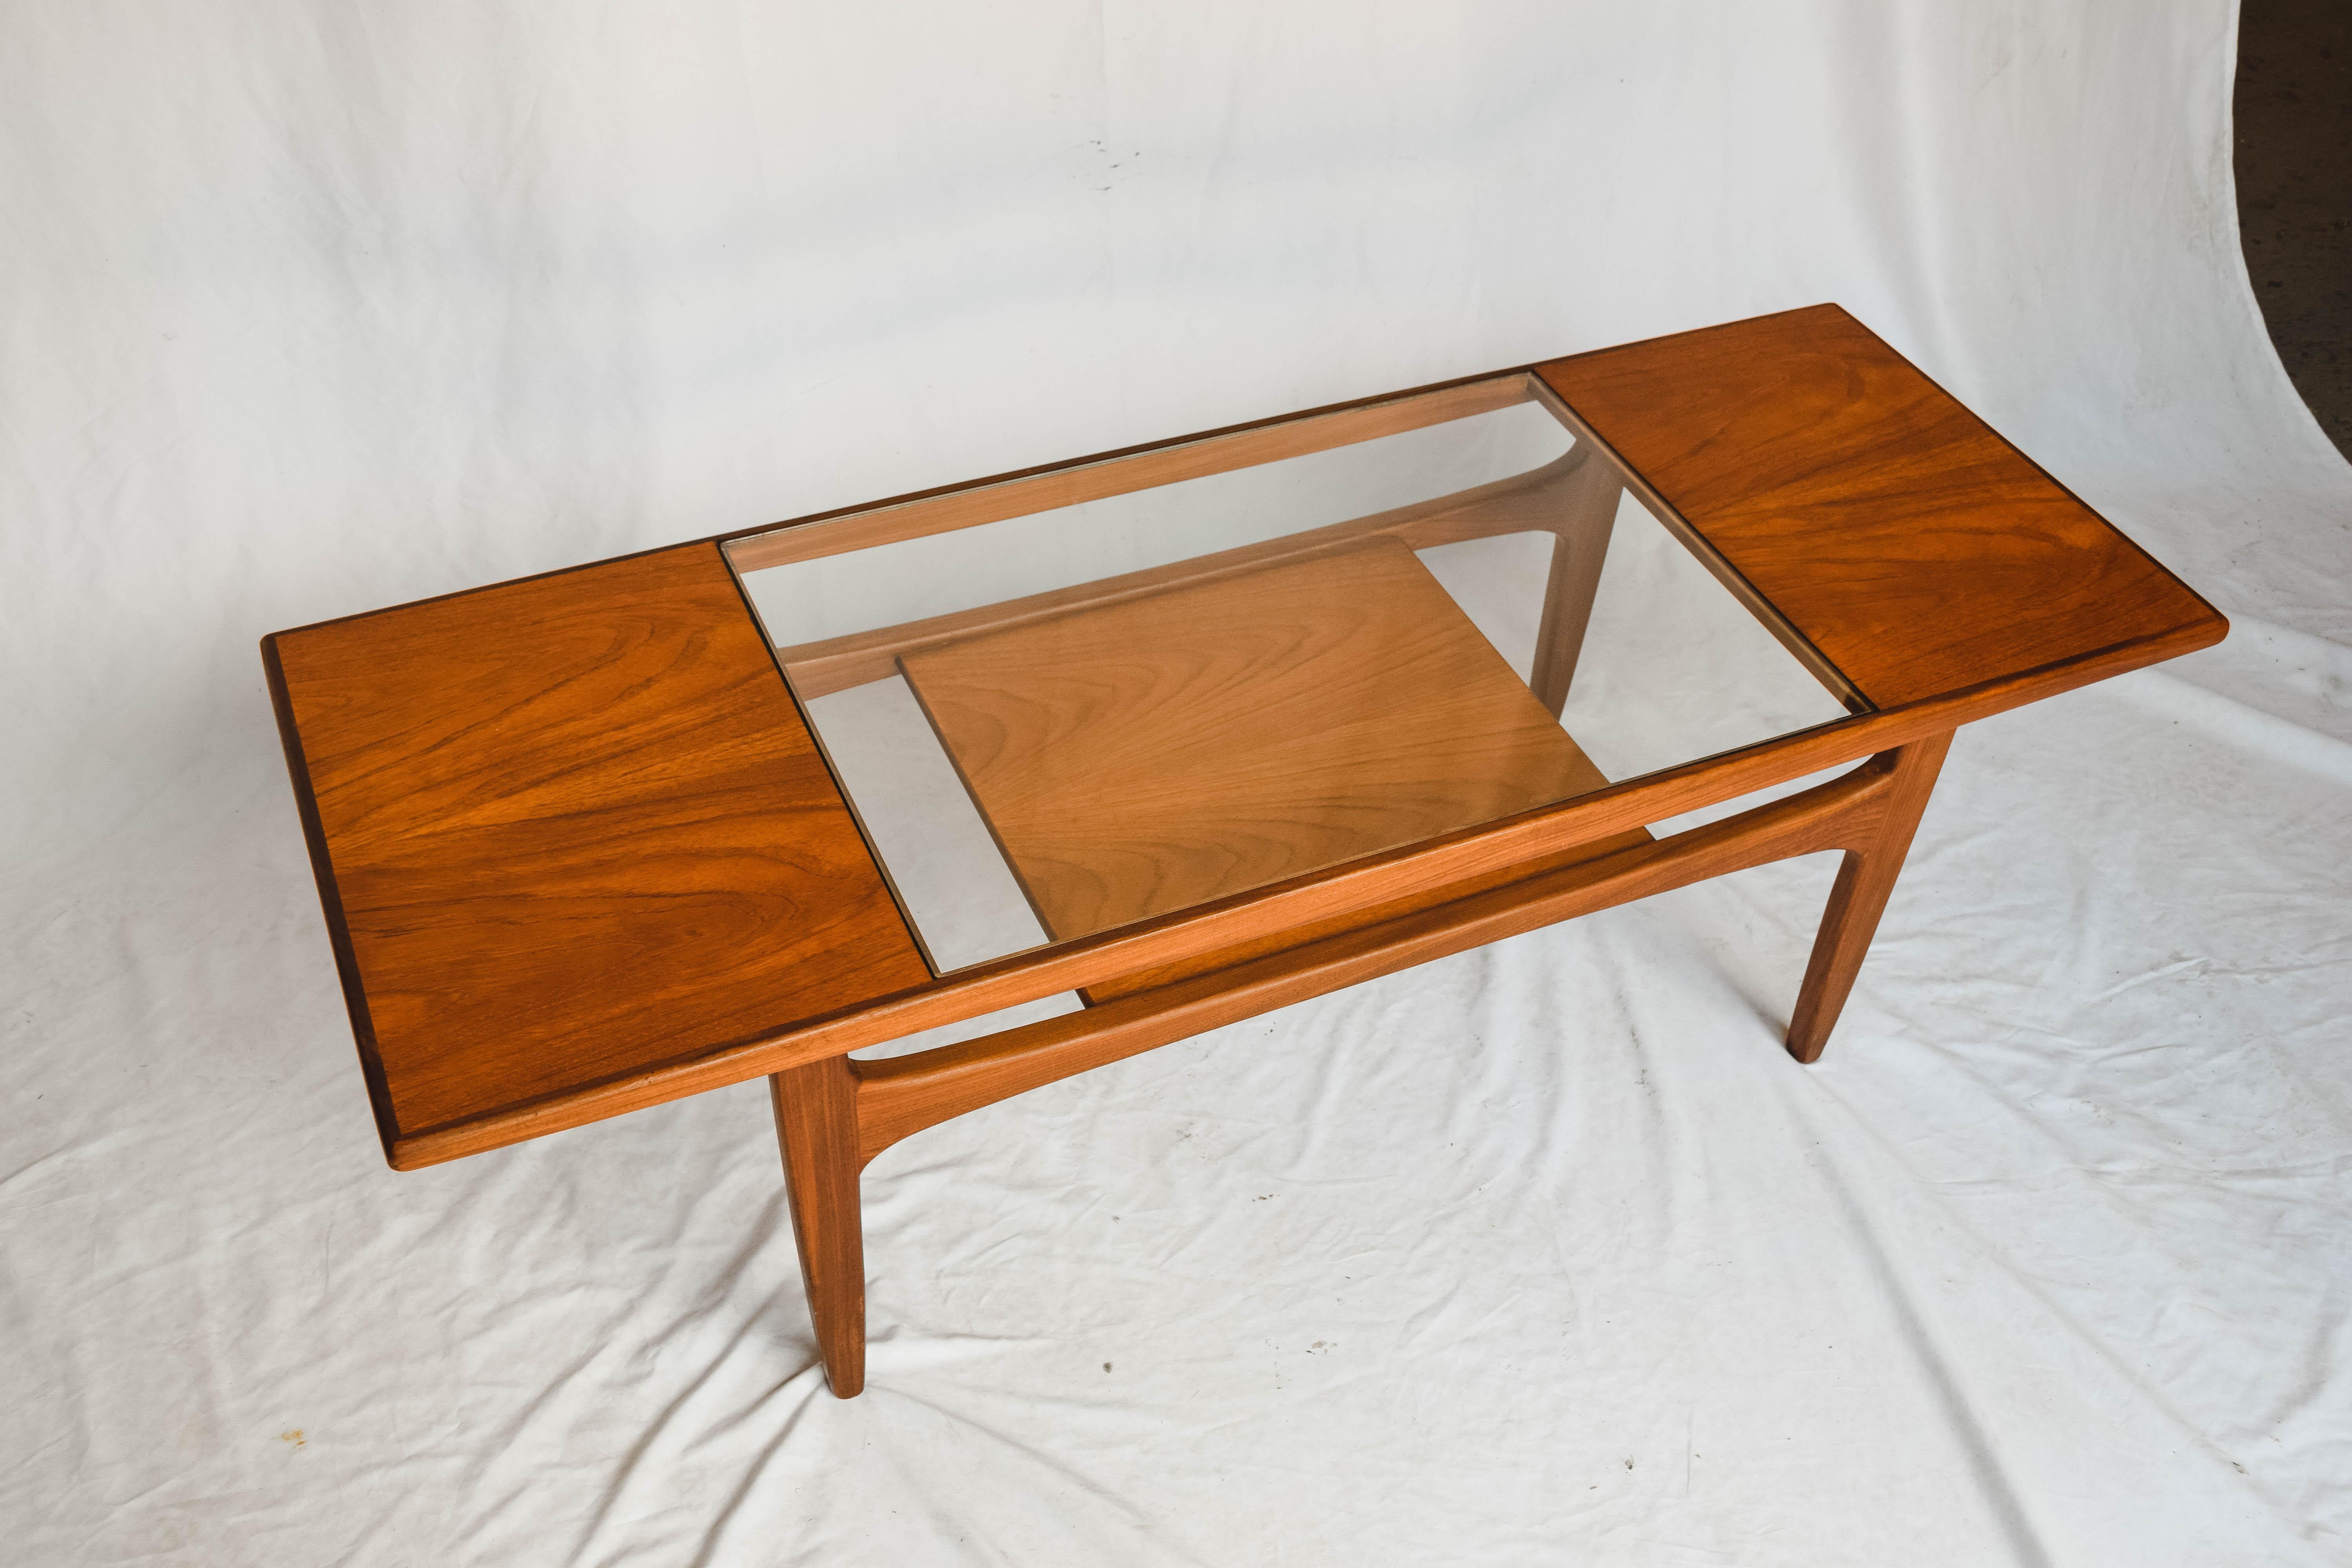 This Mid-Century Modern coffee table was designed by iconic designer V B Wilkins for G Plan in the late 1960s. This coffee table in beautiful teak features a glass top set above a lower magazine shelf. The G Plan Fresco coffee table is an ideal